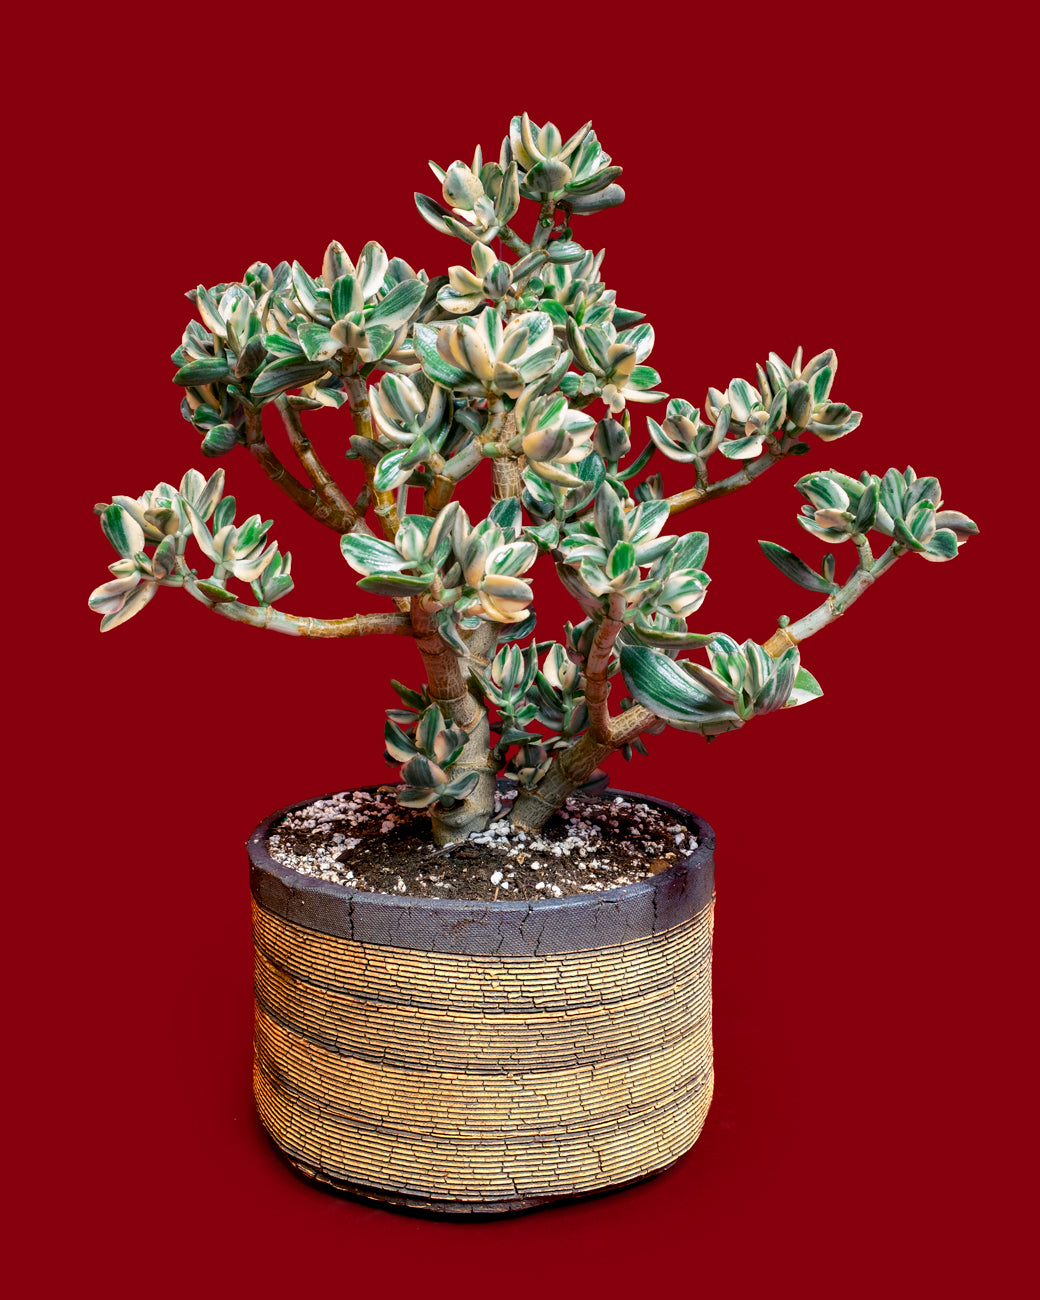 Variegated Jade (Crassula ovata) pruned and sculpted into a bonsai shape, potted in custom Com Work pottery and photographed at Tula Plants & Design.